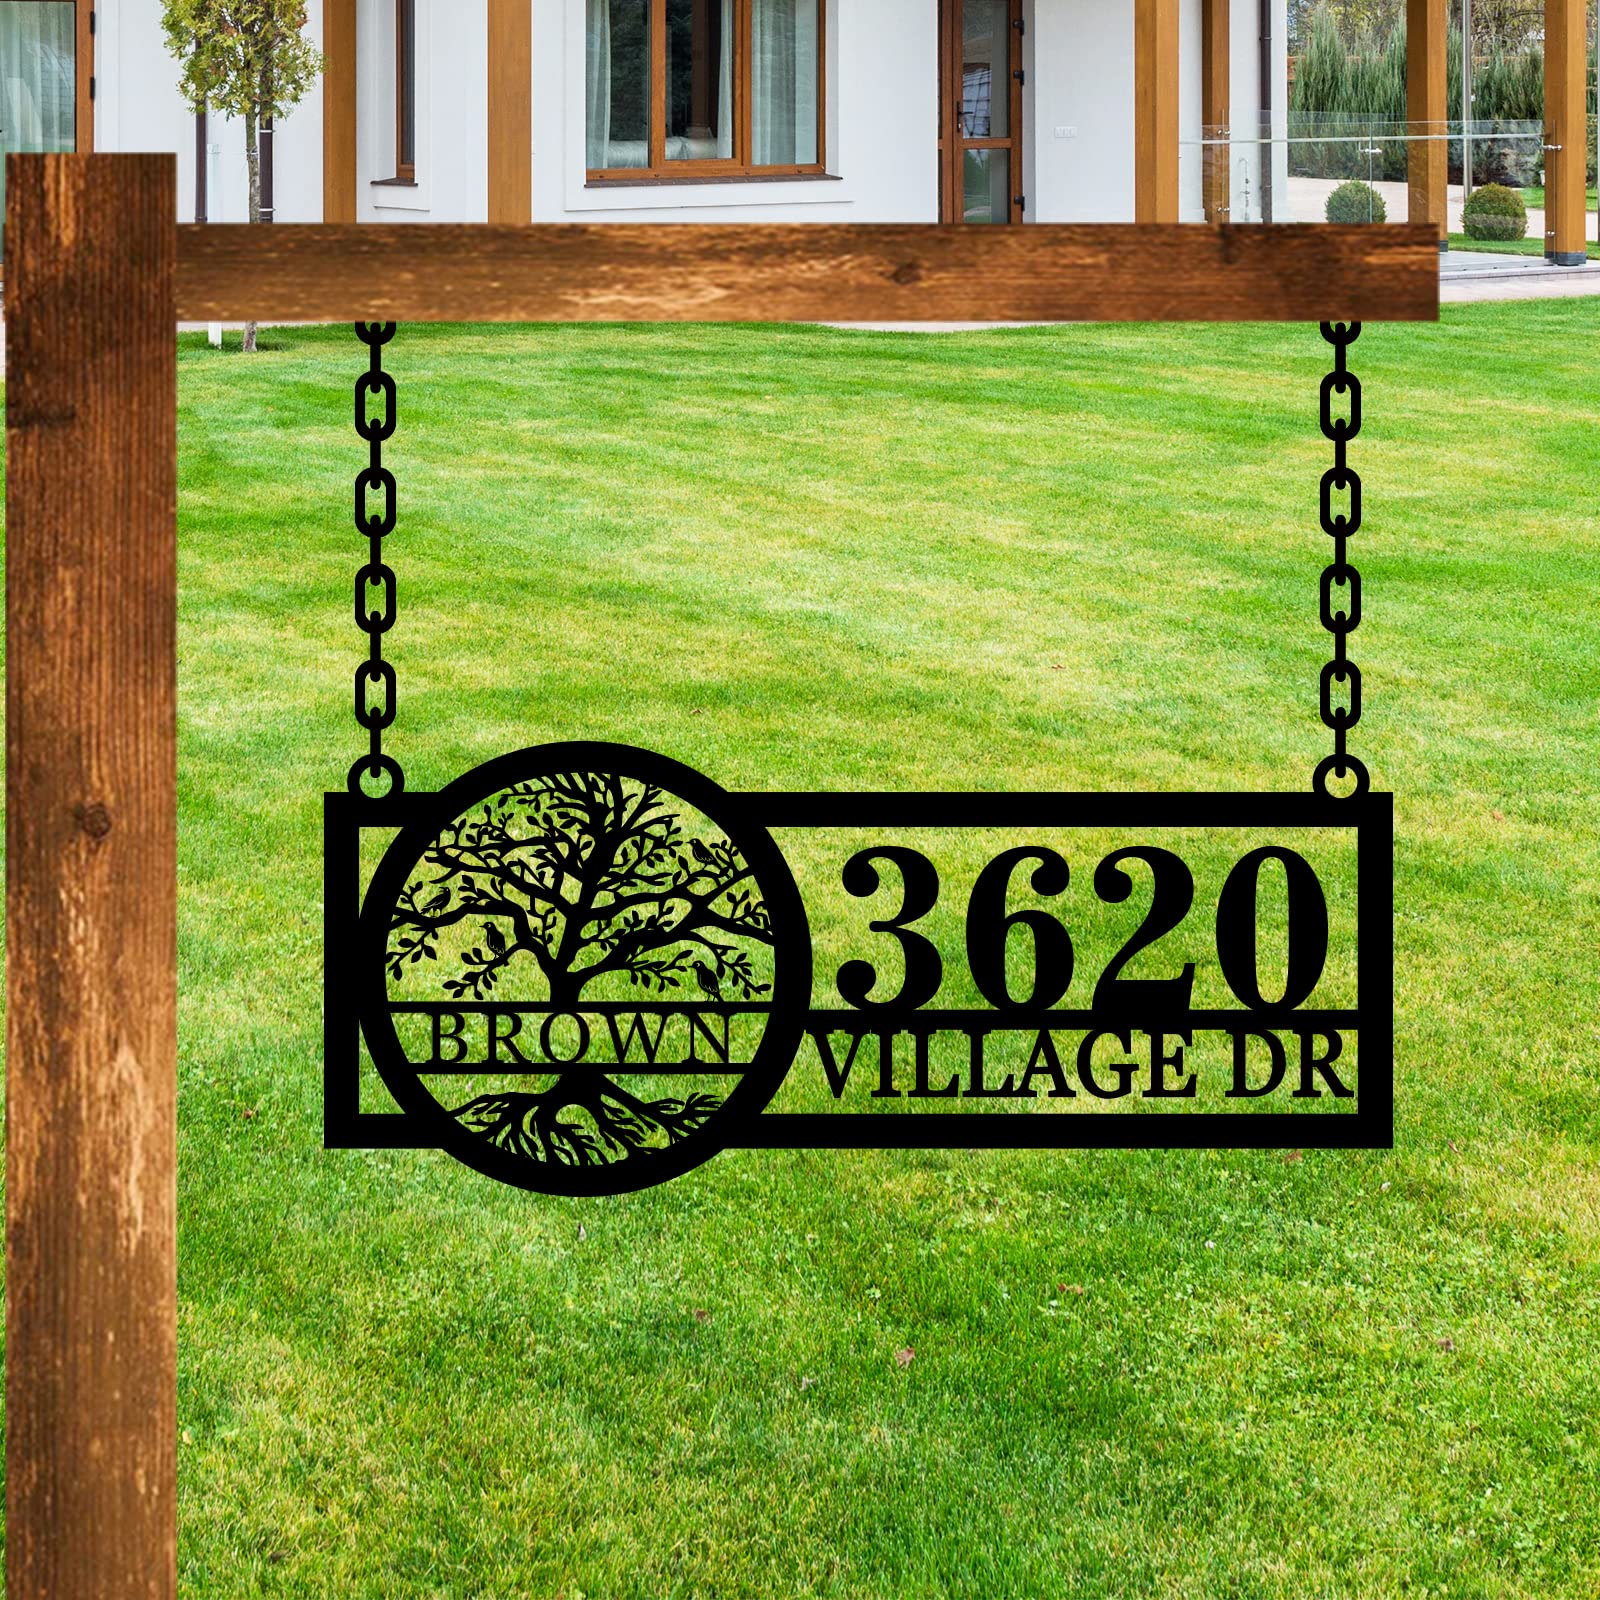 14"w - 40"w Custom Metal Hanging Address Sign, Hanging Address Sign for Mailbox, Lamp Post Address Signs, Hanging Address Numbers for Houses, Hanging Metal House Numbers